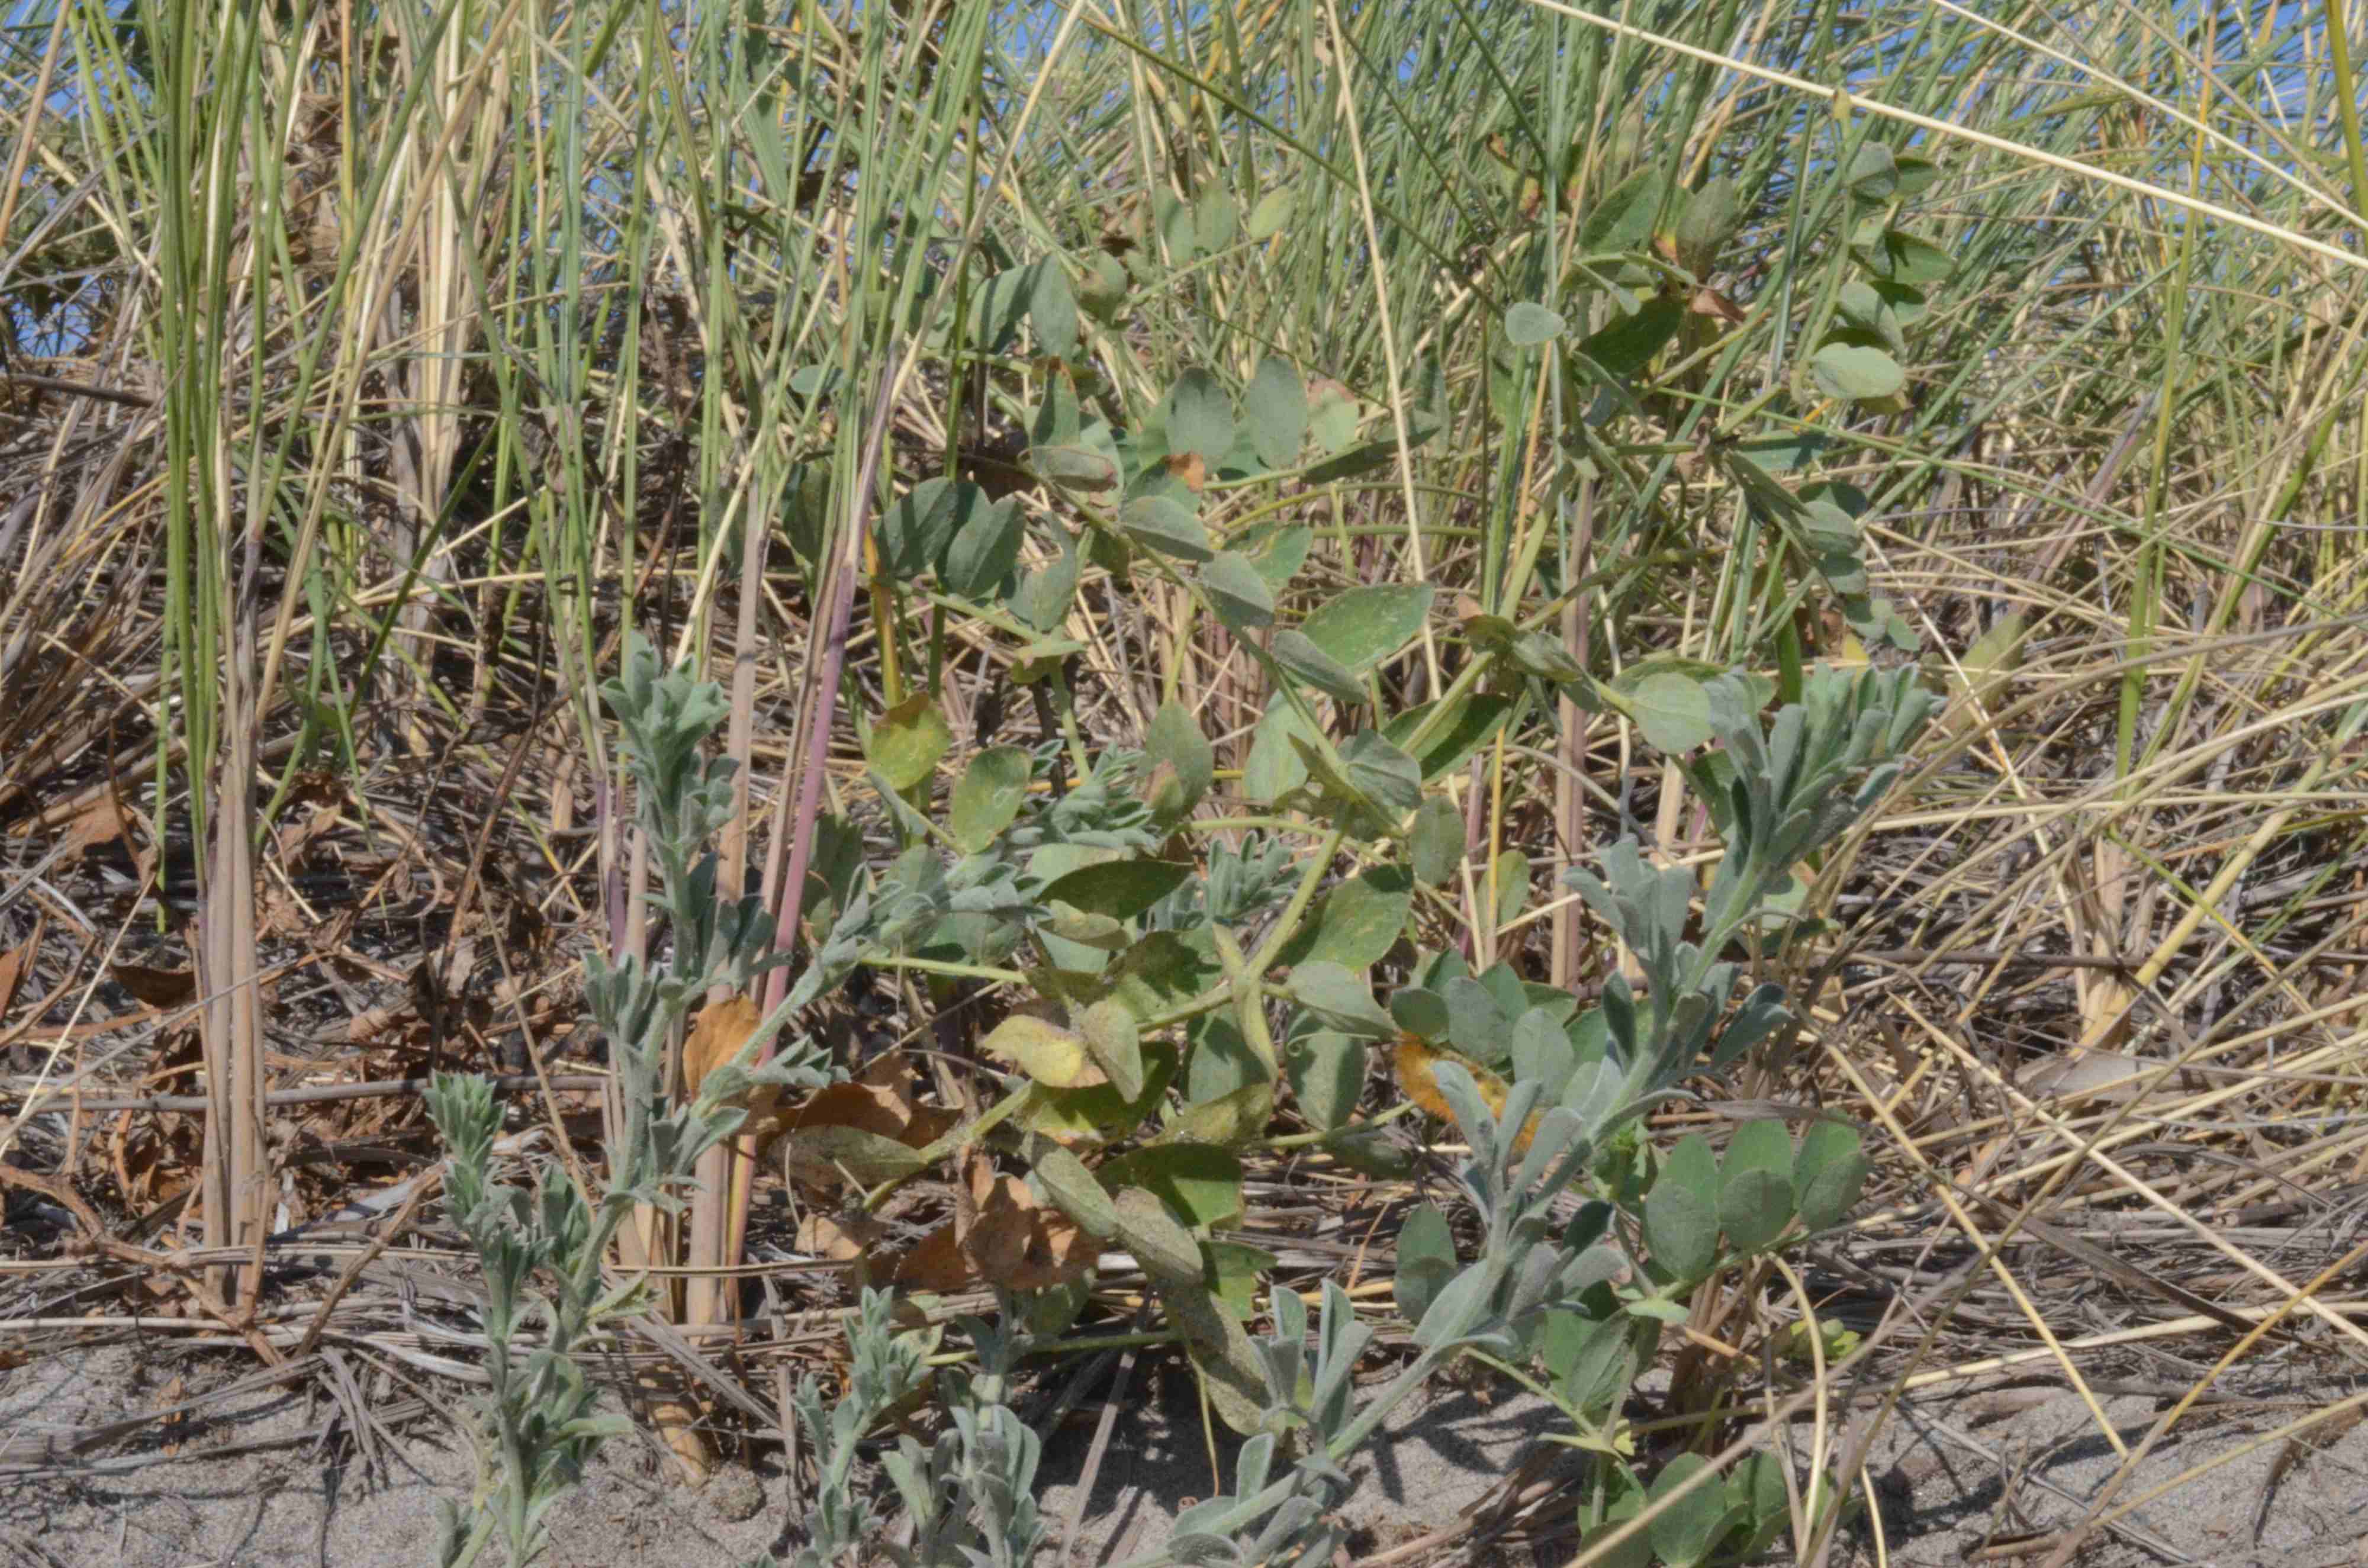 Lathyrus littoralis (front; silvery) and Lathyrus japonicus (back; green) co-occurring in a coastal dune.